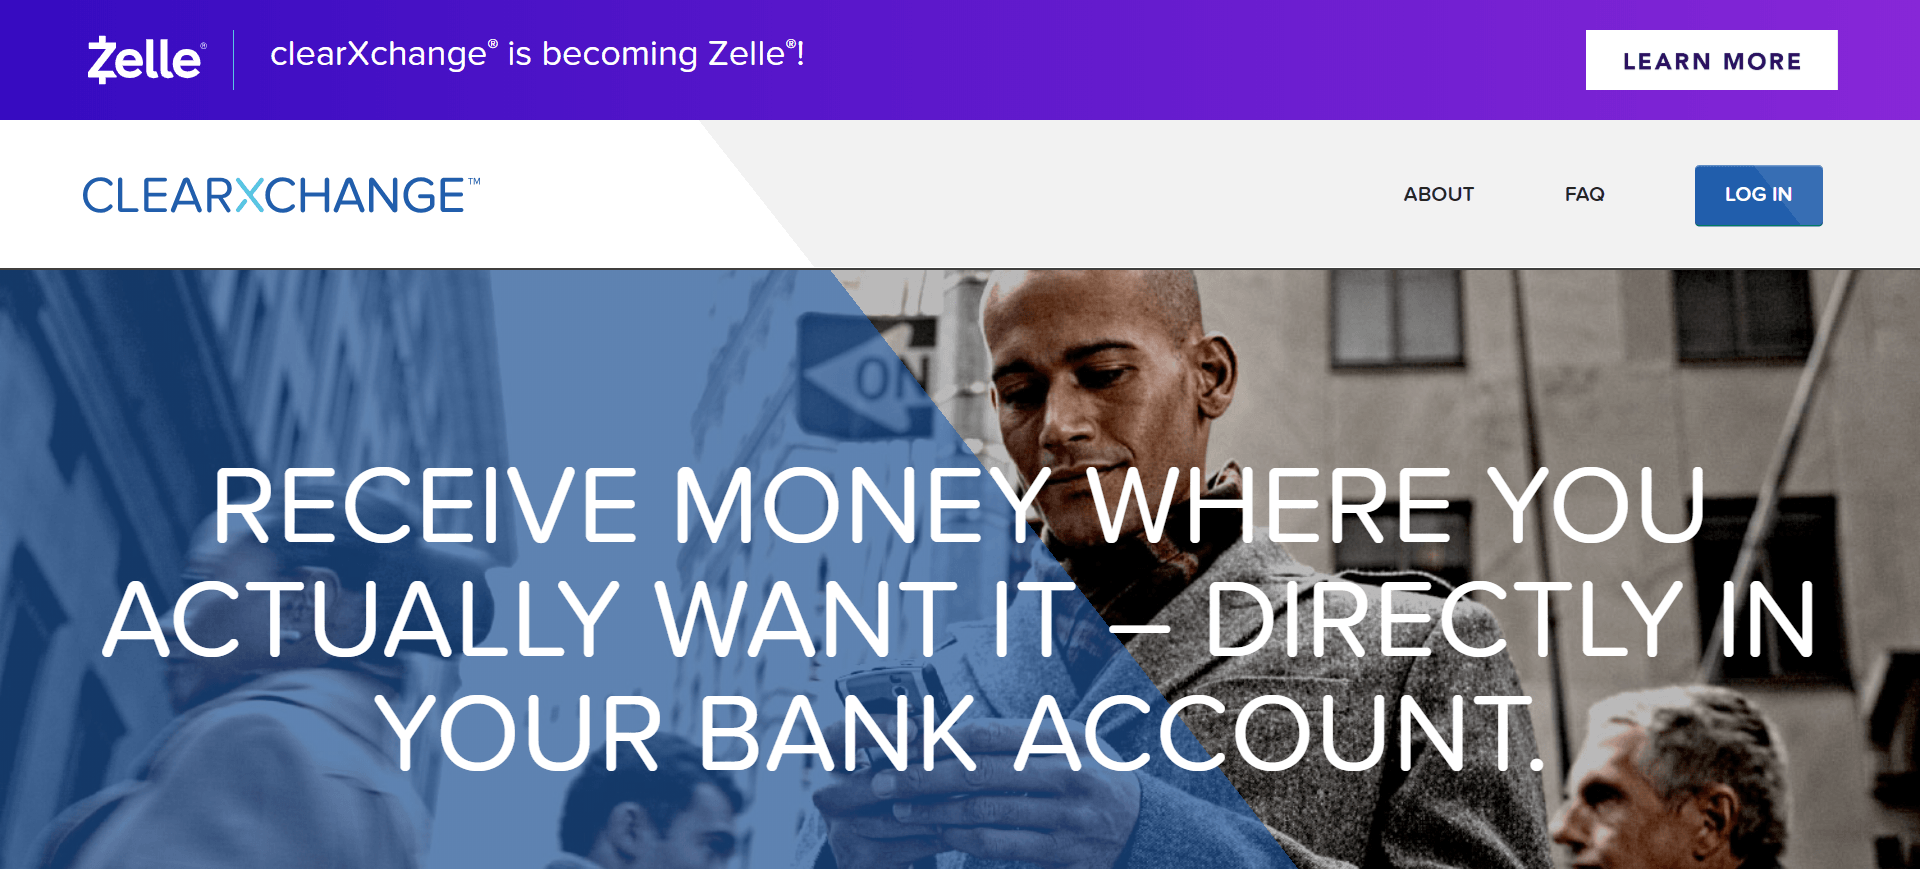 Zelle clearXchange Logo - How Big Banks Agreed to Co-Invest in Zelle